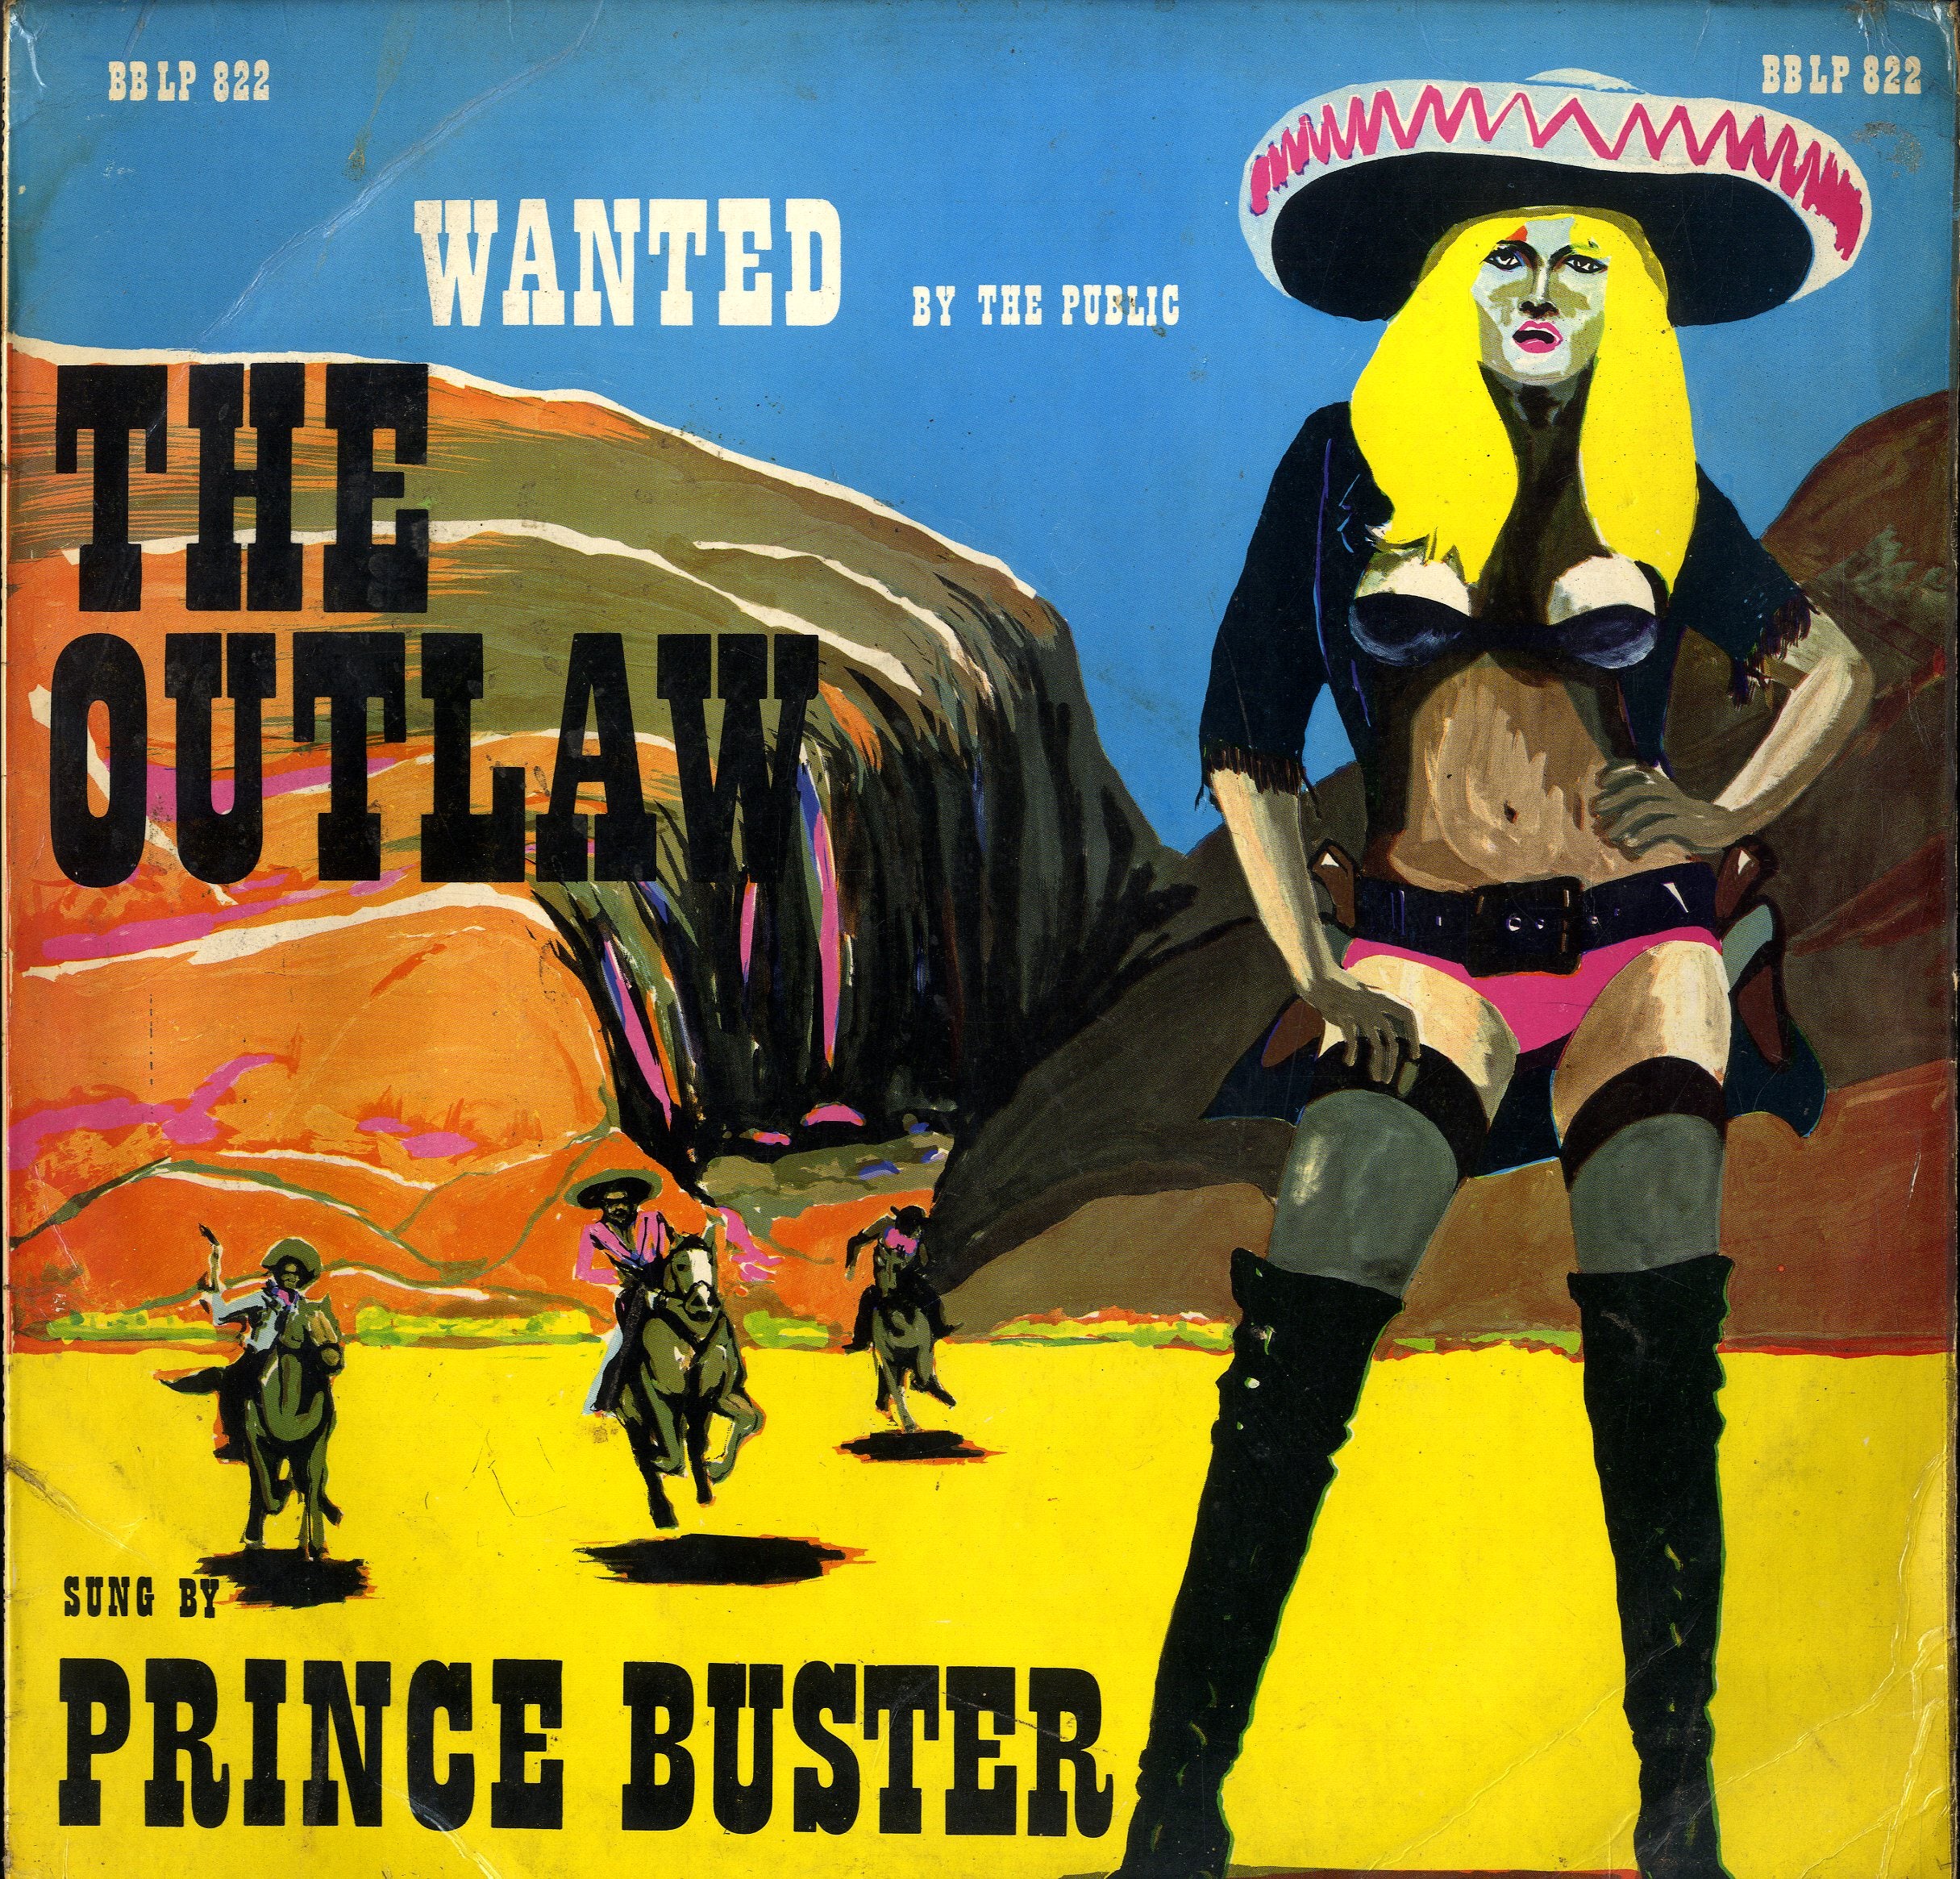 PRINCE BUSTER [The Outlaw]